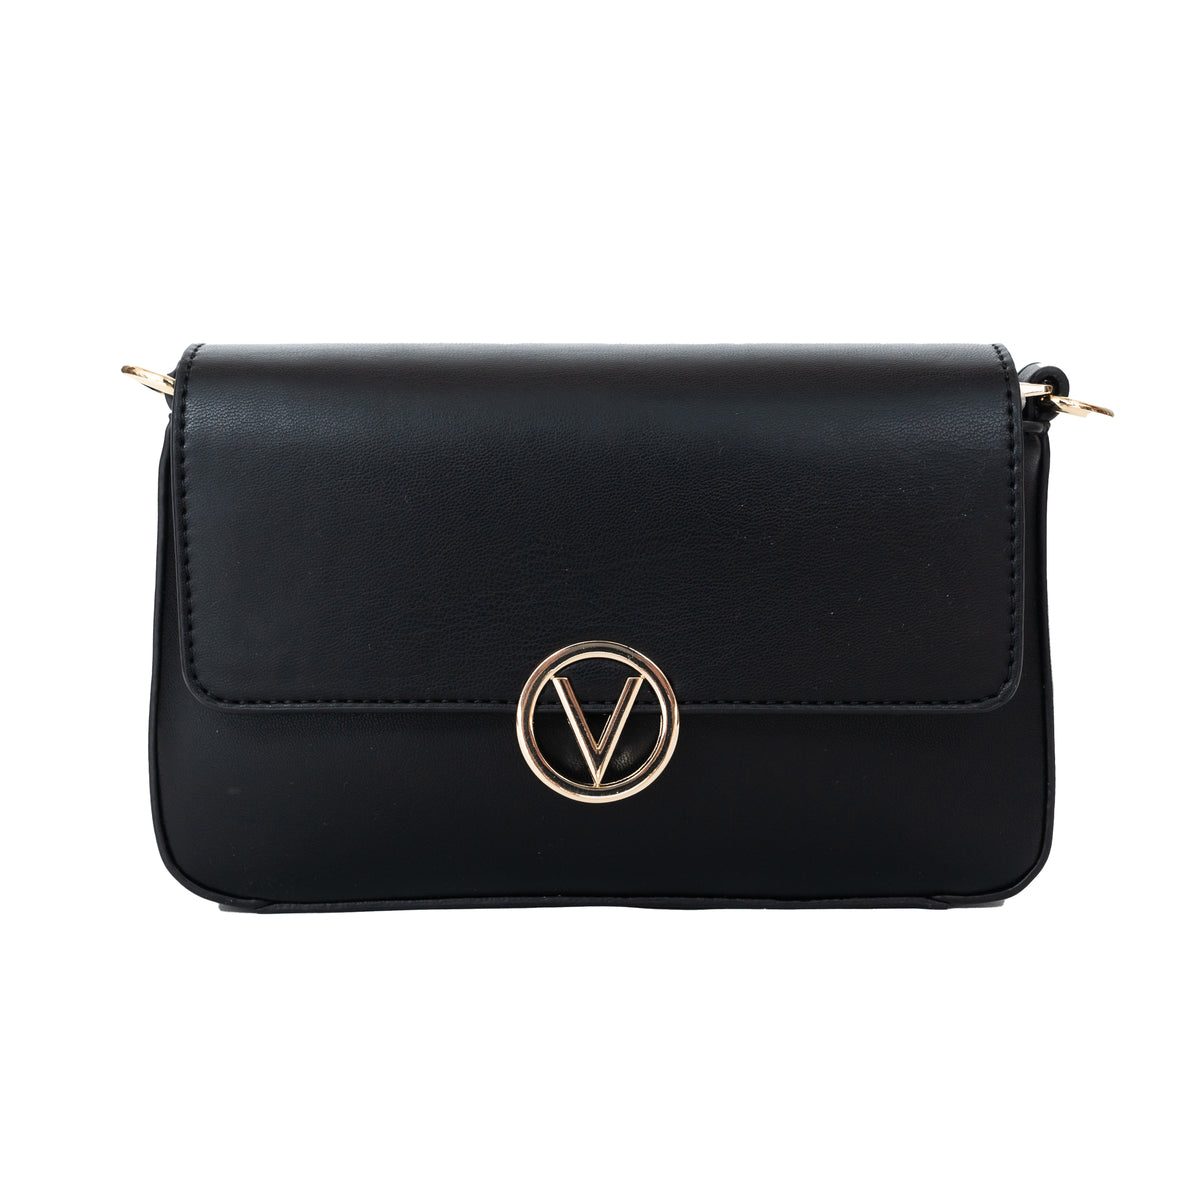 Load image into Gallery viewer, Valentino Bags Nero Black July Shoulder Bag
